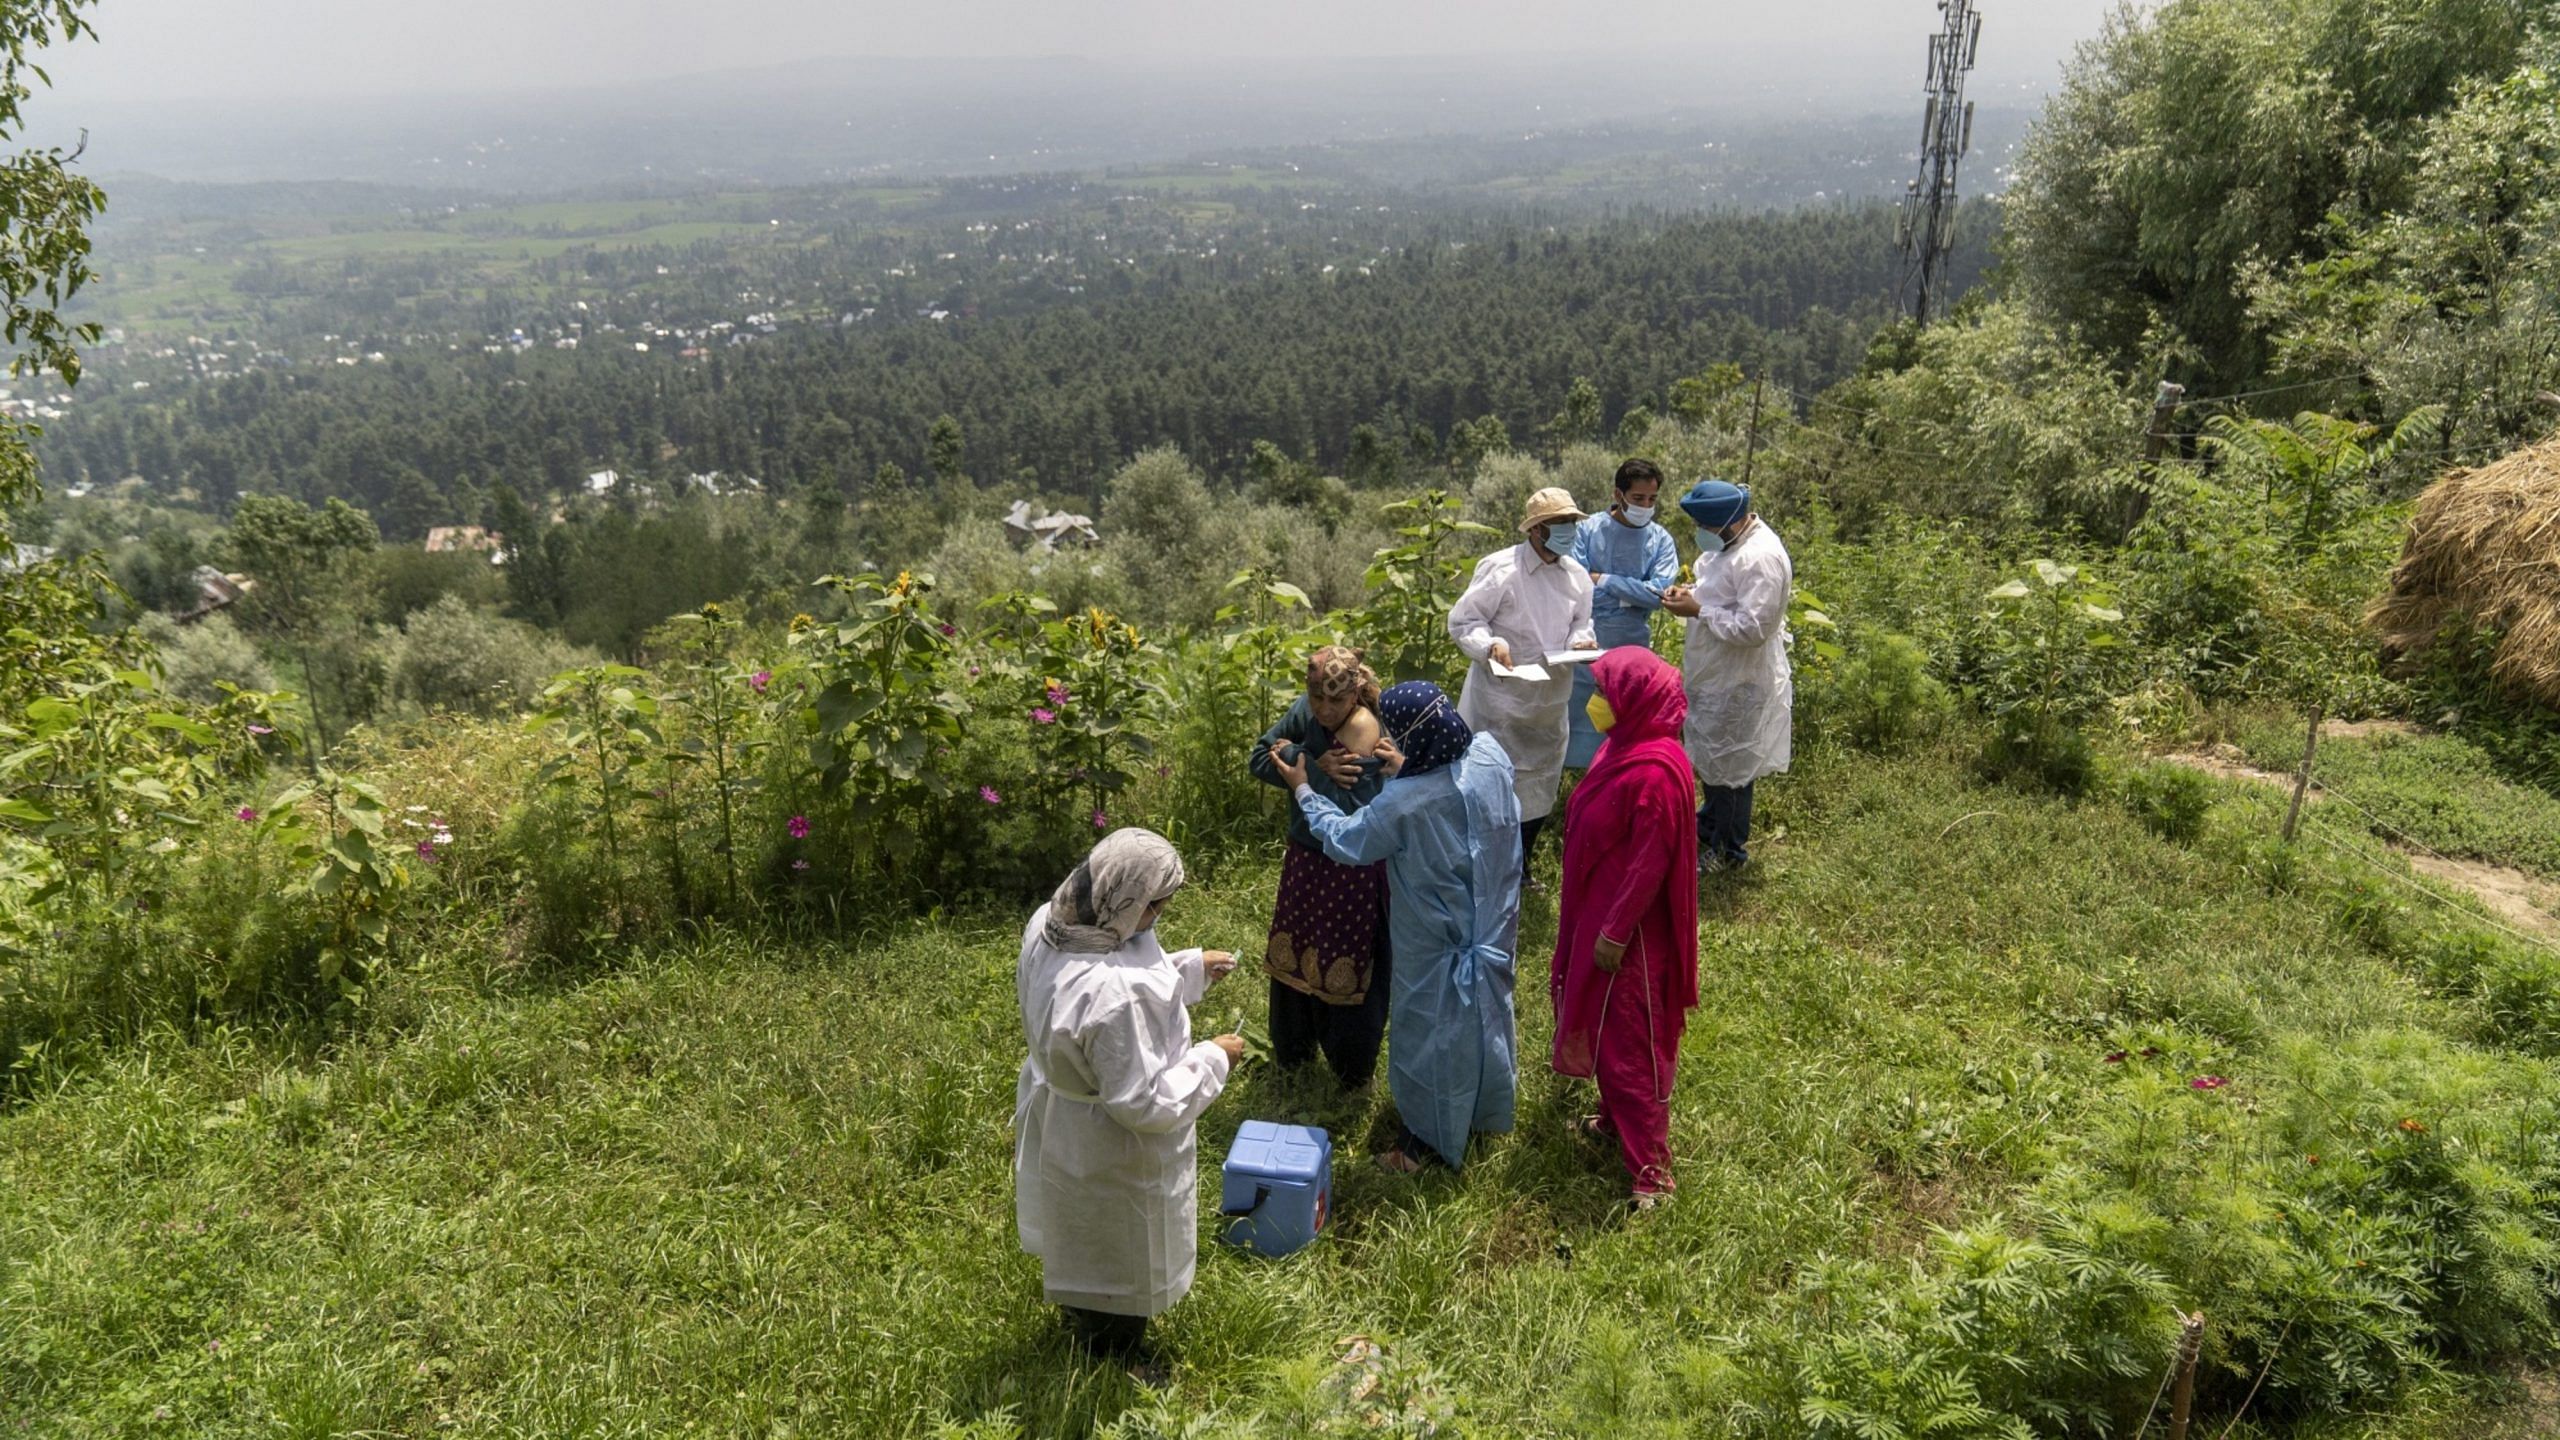 A “door-to-door” vaccination team inoculates residents at a village in the Budgam district of Jammu and Kashmir, India, in August 2021. Photographer: Sumit Dayal/Bloomberg